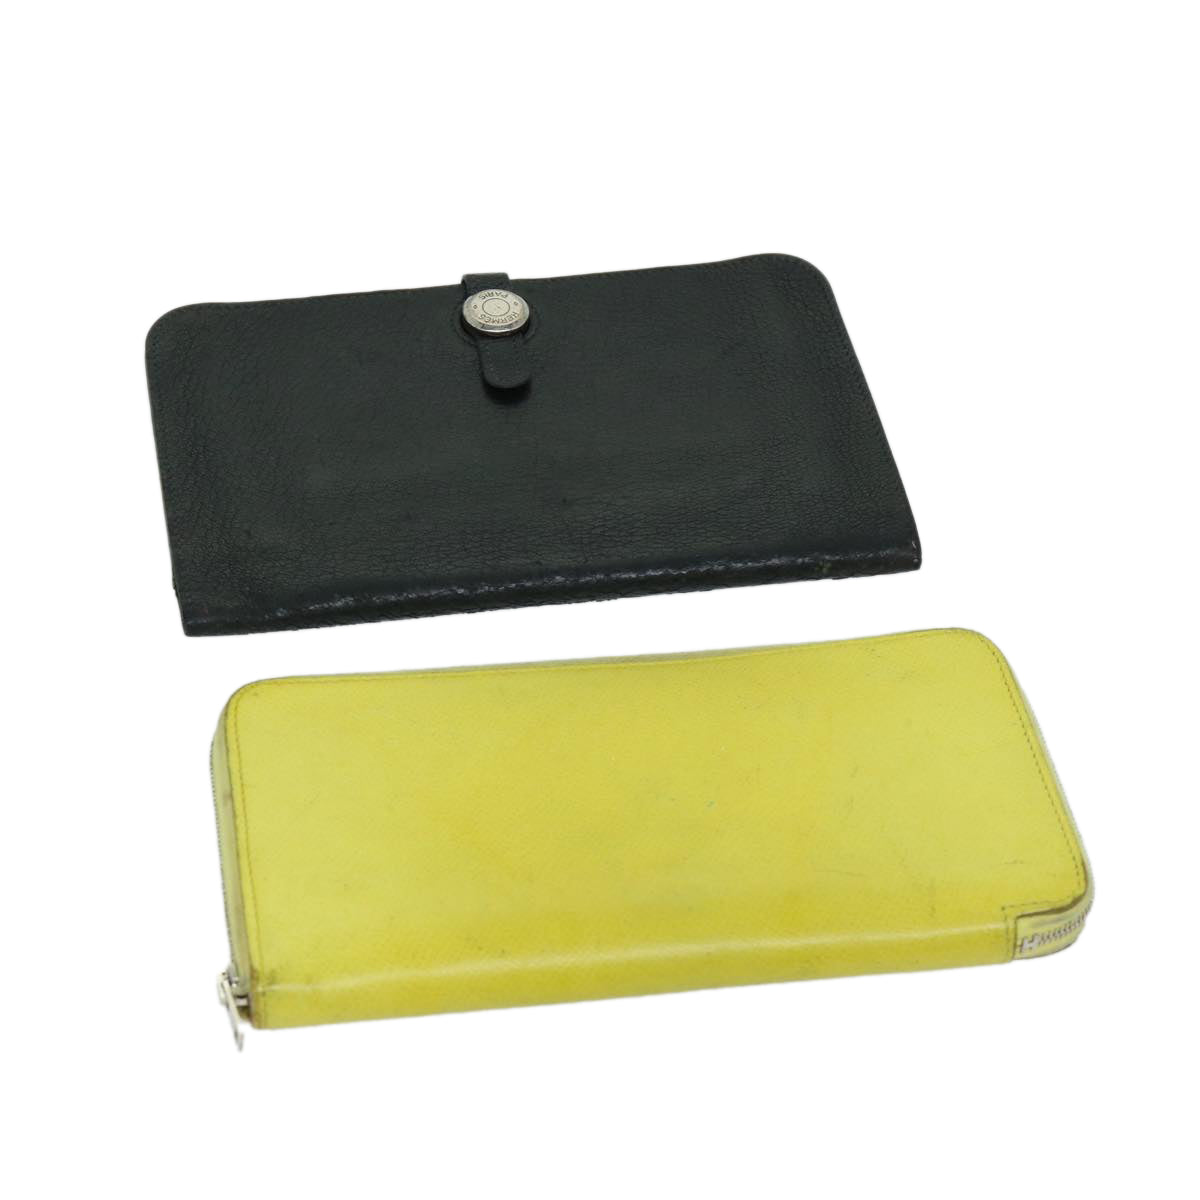 HERMES Long Wallet Leather 2Set Black Yellow Auth yb512